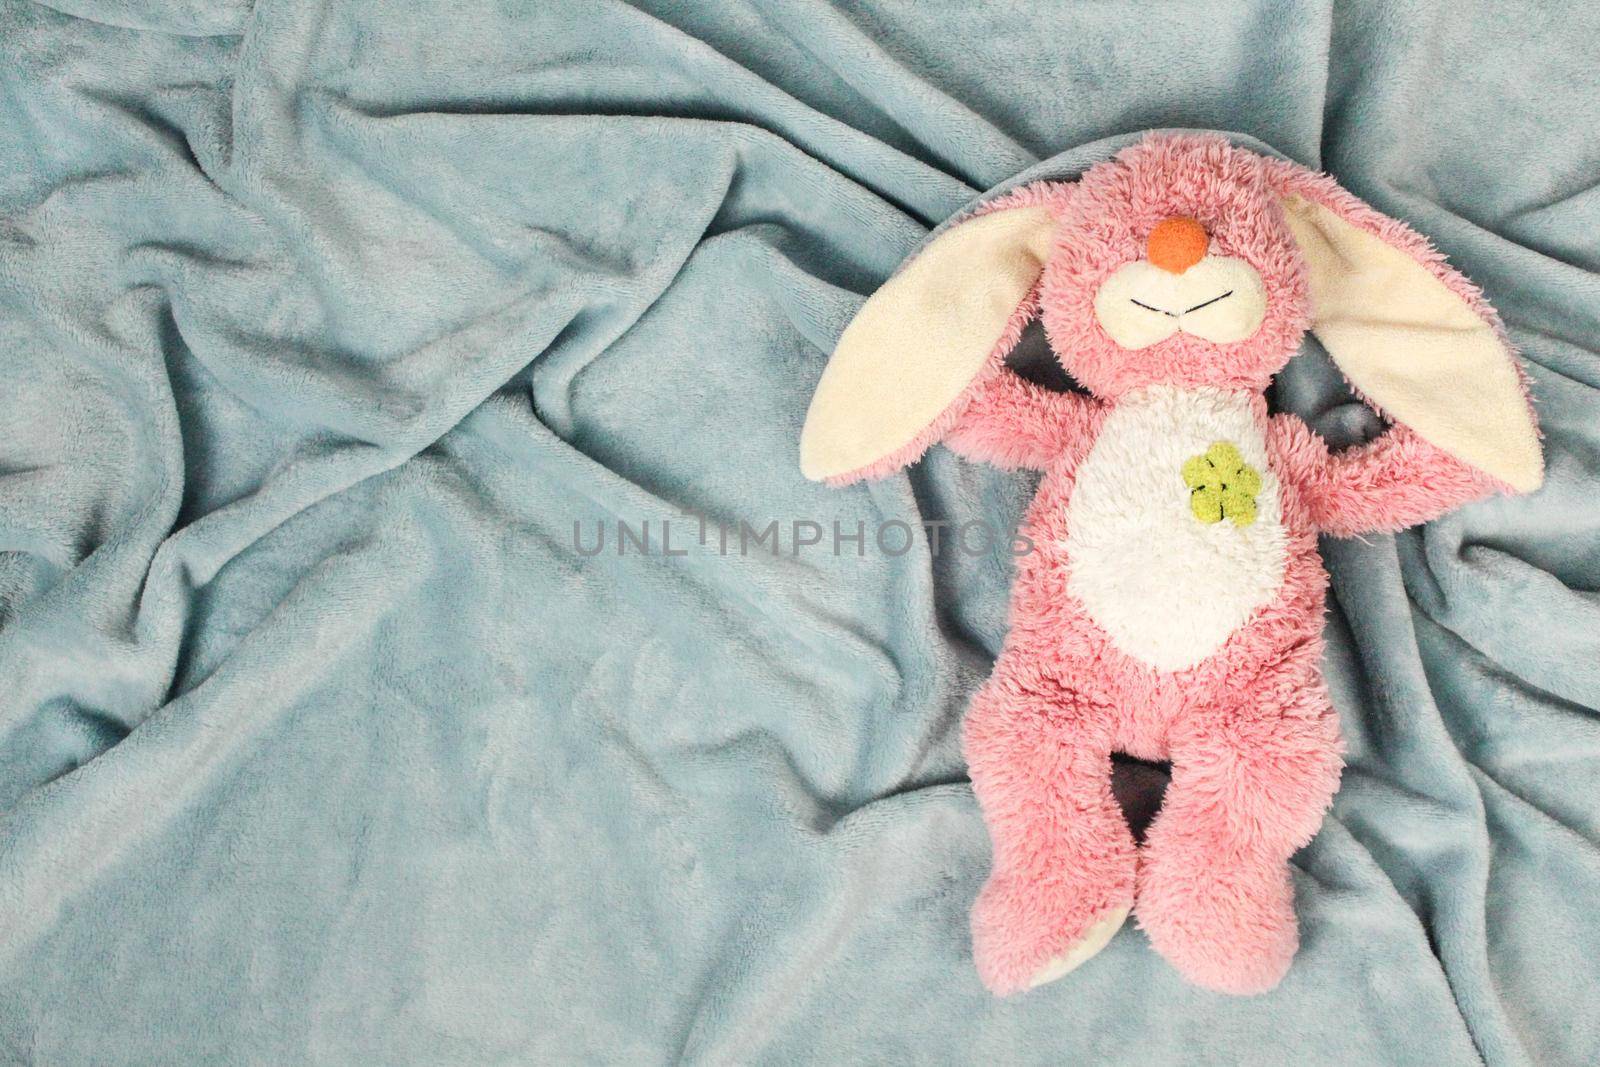 A plush bunny toy sitting on plush blanket and white wall. Plush pink bunny toy with pink knitted octopus.